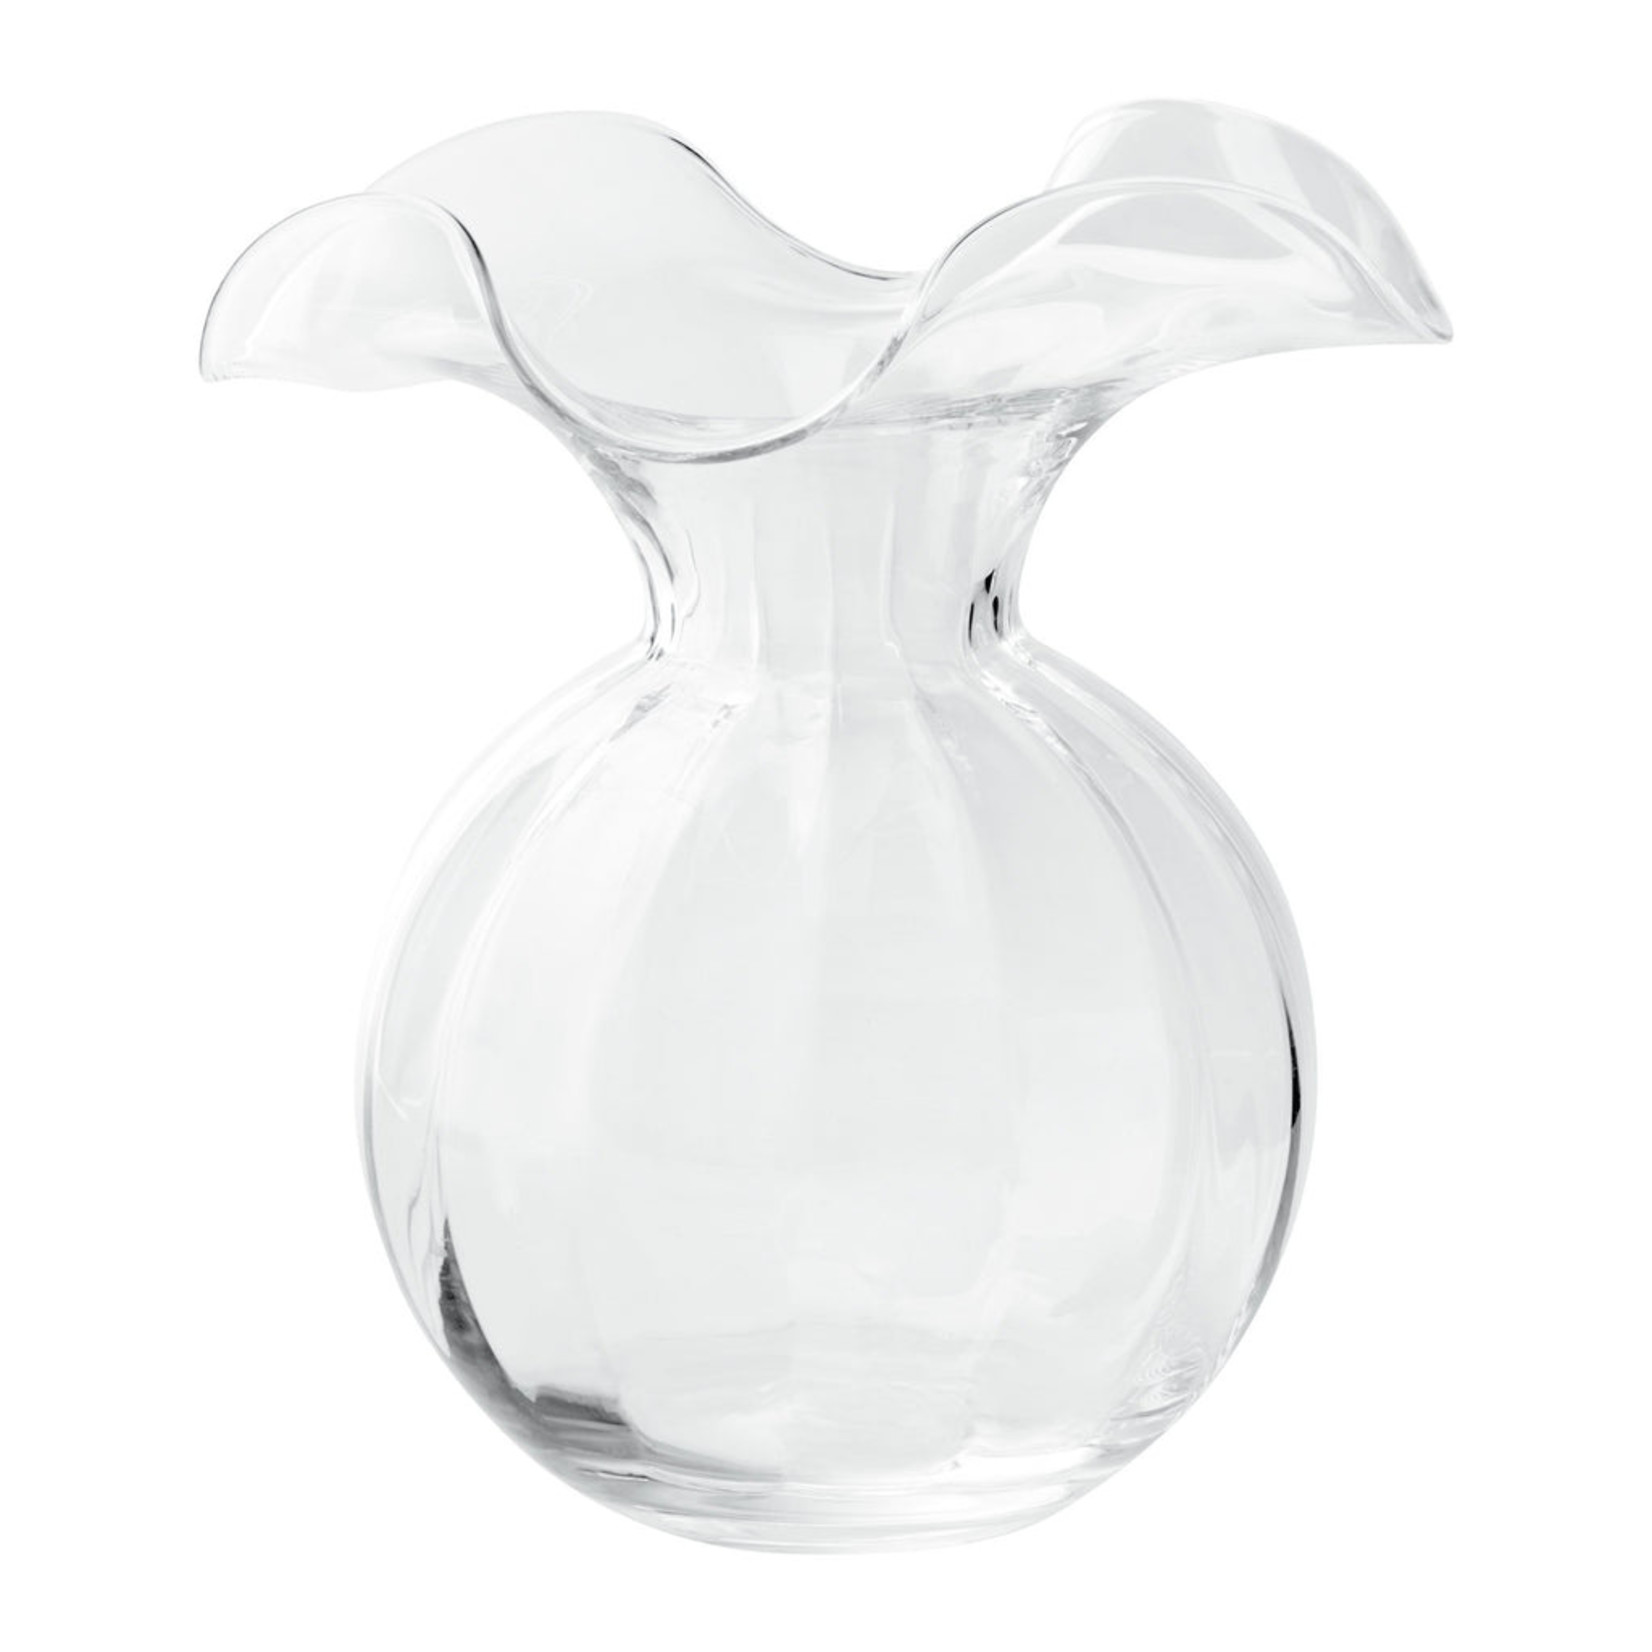 Vietri Hibiscus Small Fluted Vase, clear, 7"H